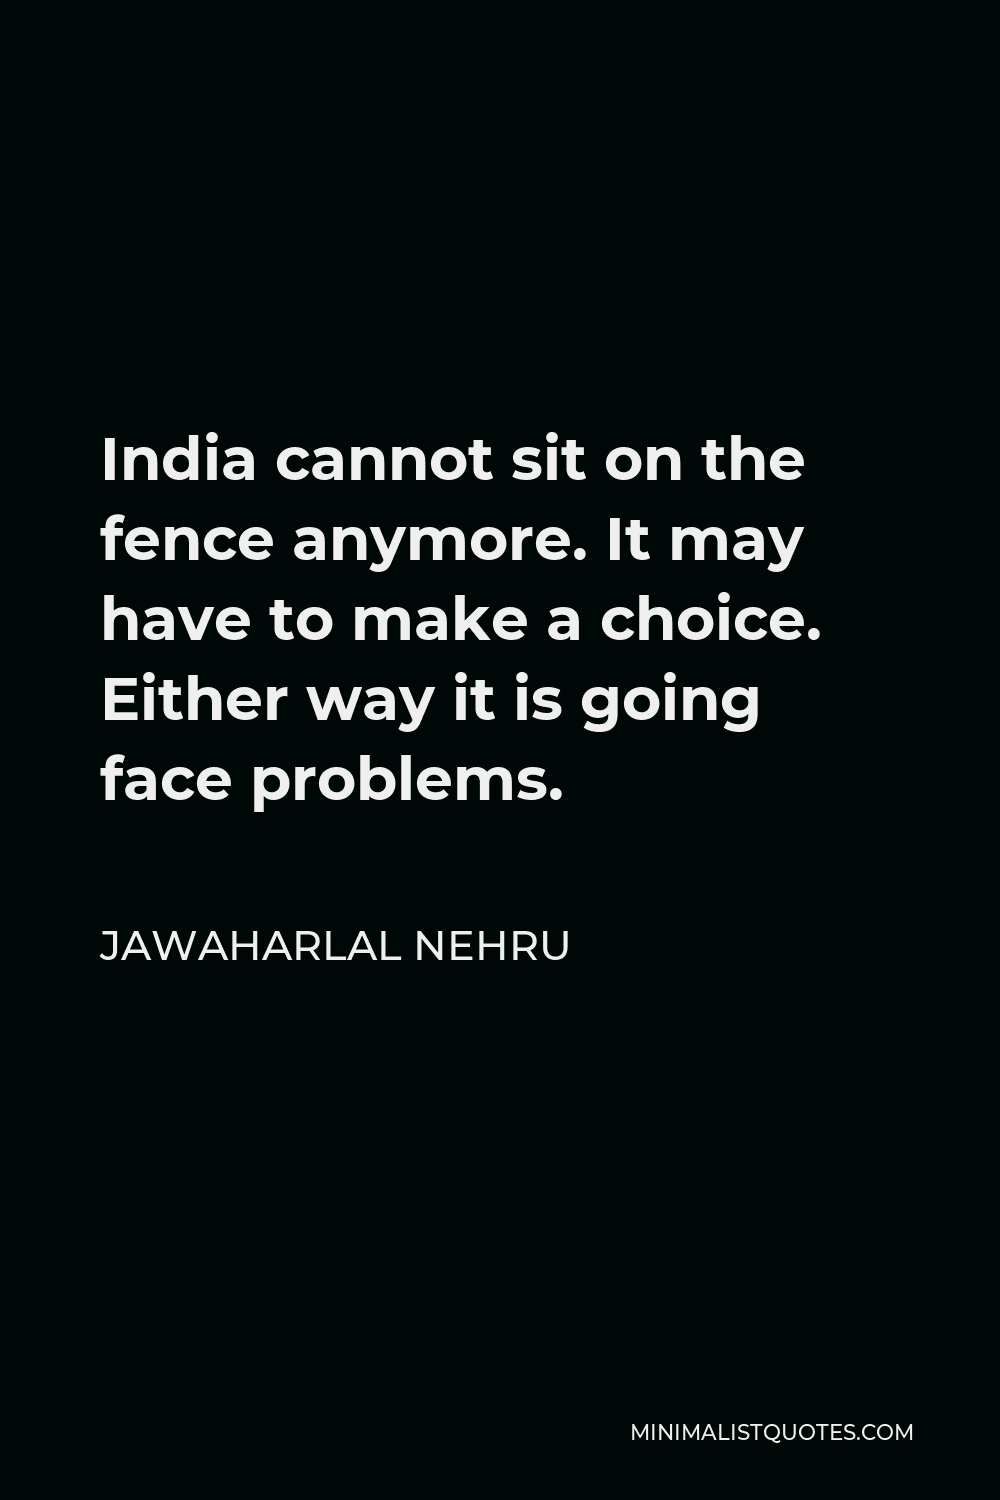 Jawaharlal Nehru Quote - India cannot sit on the fence anymore. It may have to make a choice. Either way it is going face problems.